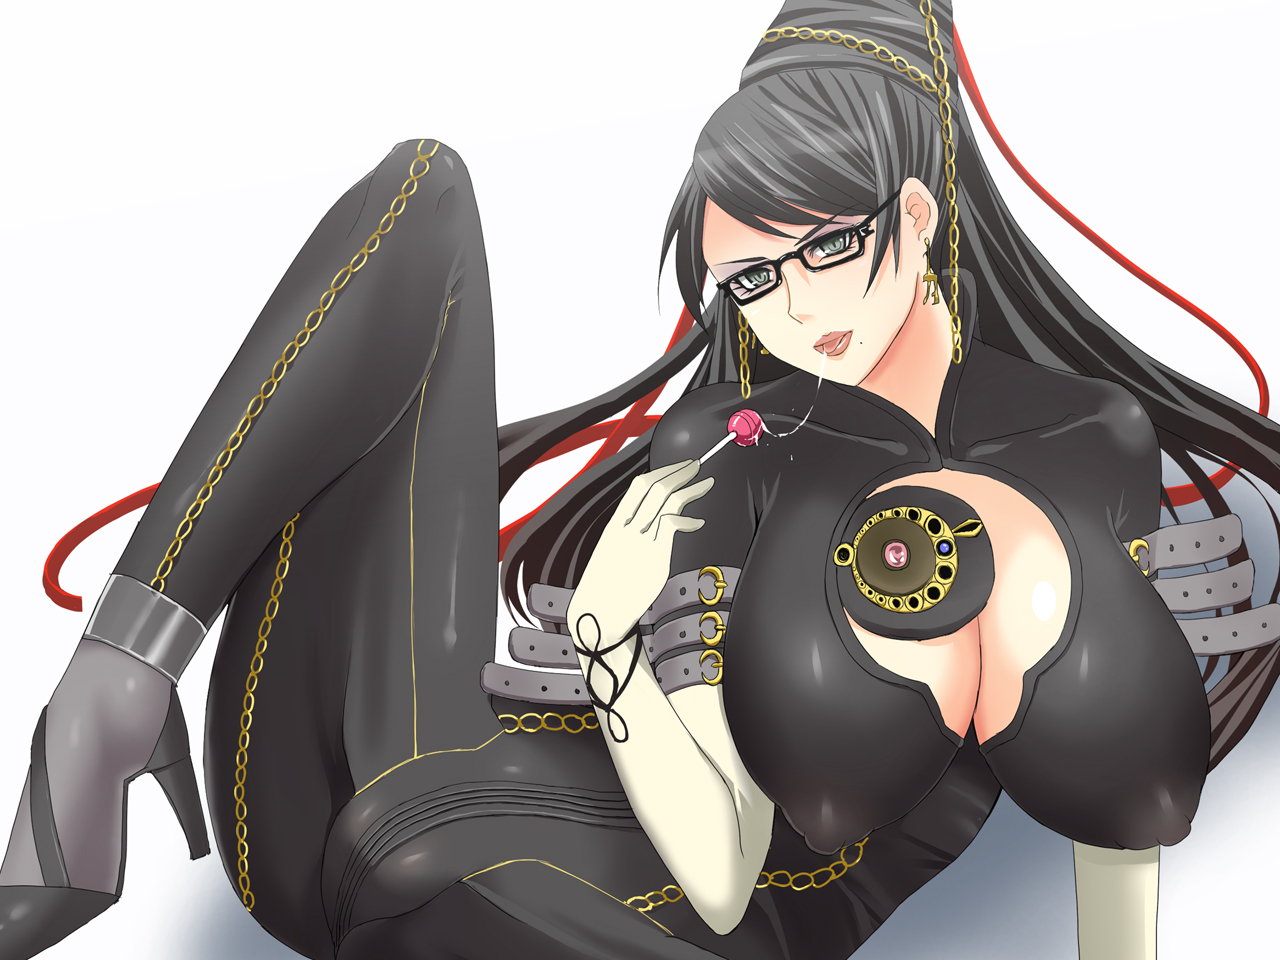 More Bayonetta Pictures.